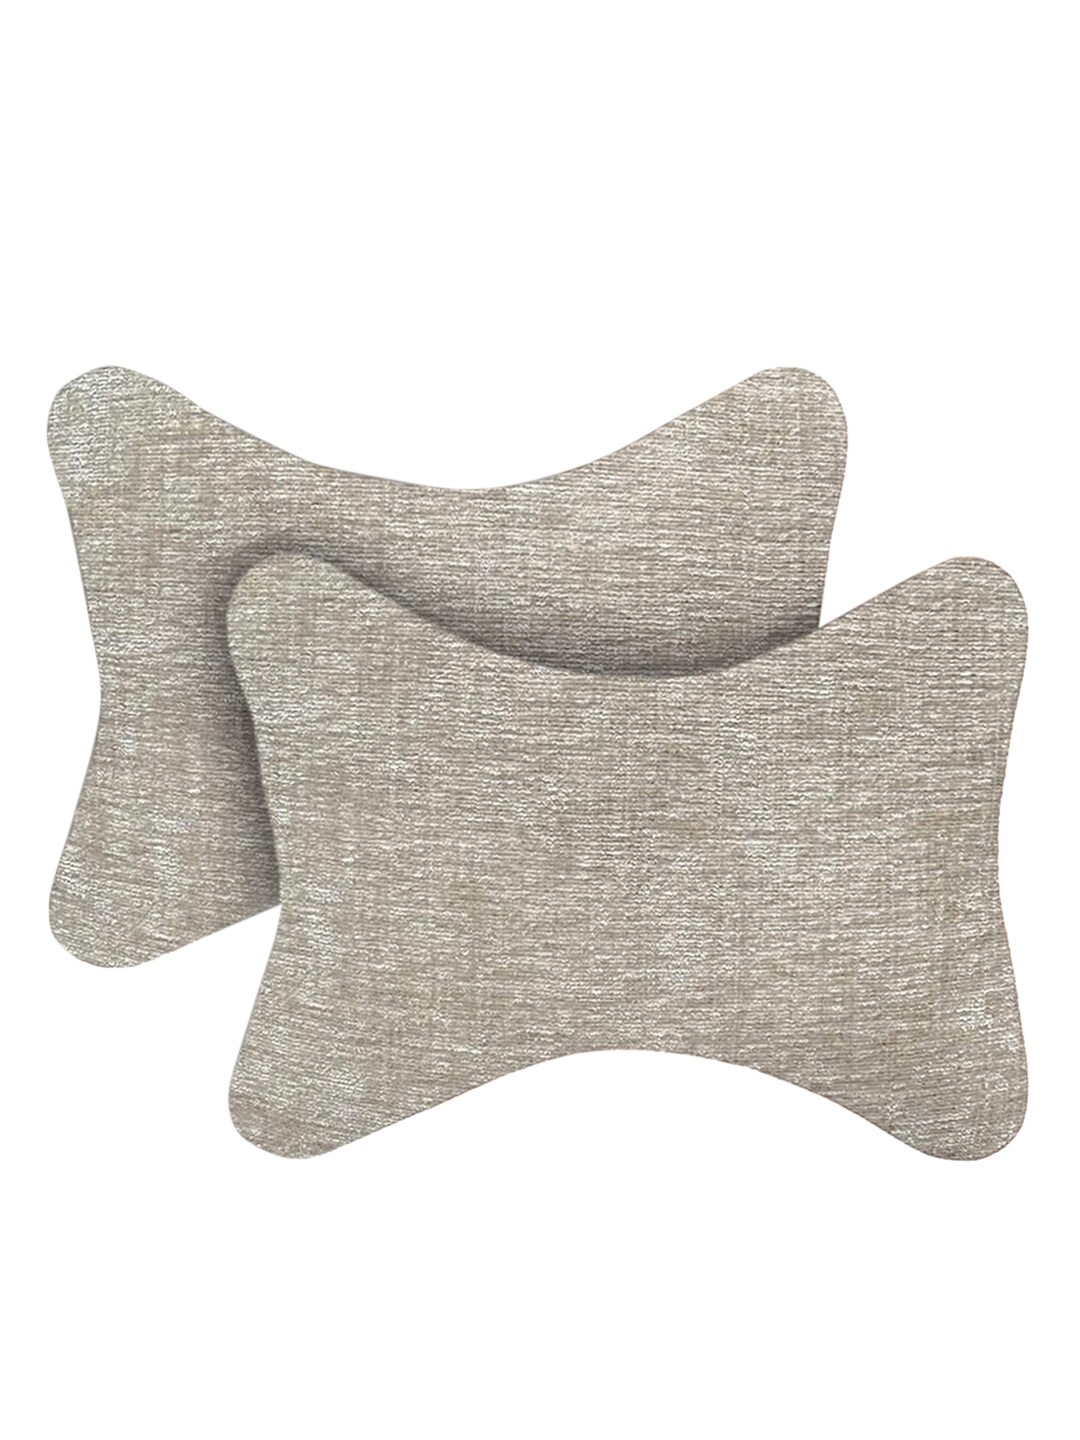 Lushomes Grey Set of 2 Car Seat Neck Rest Pillow Price in India